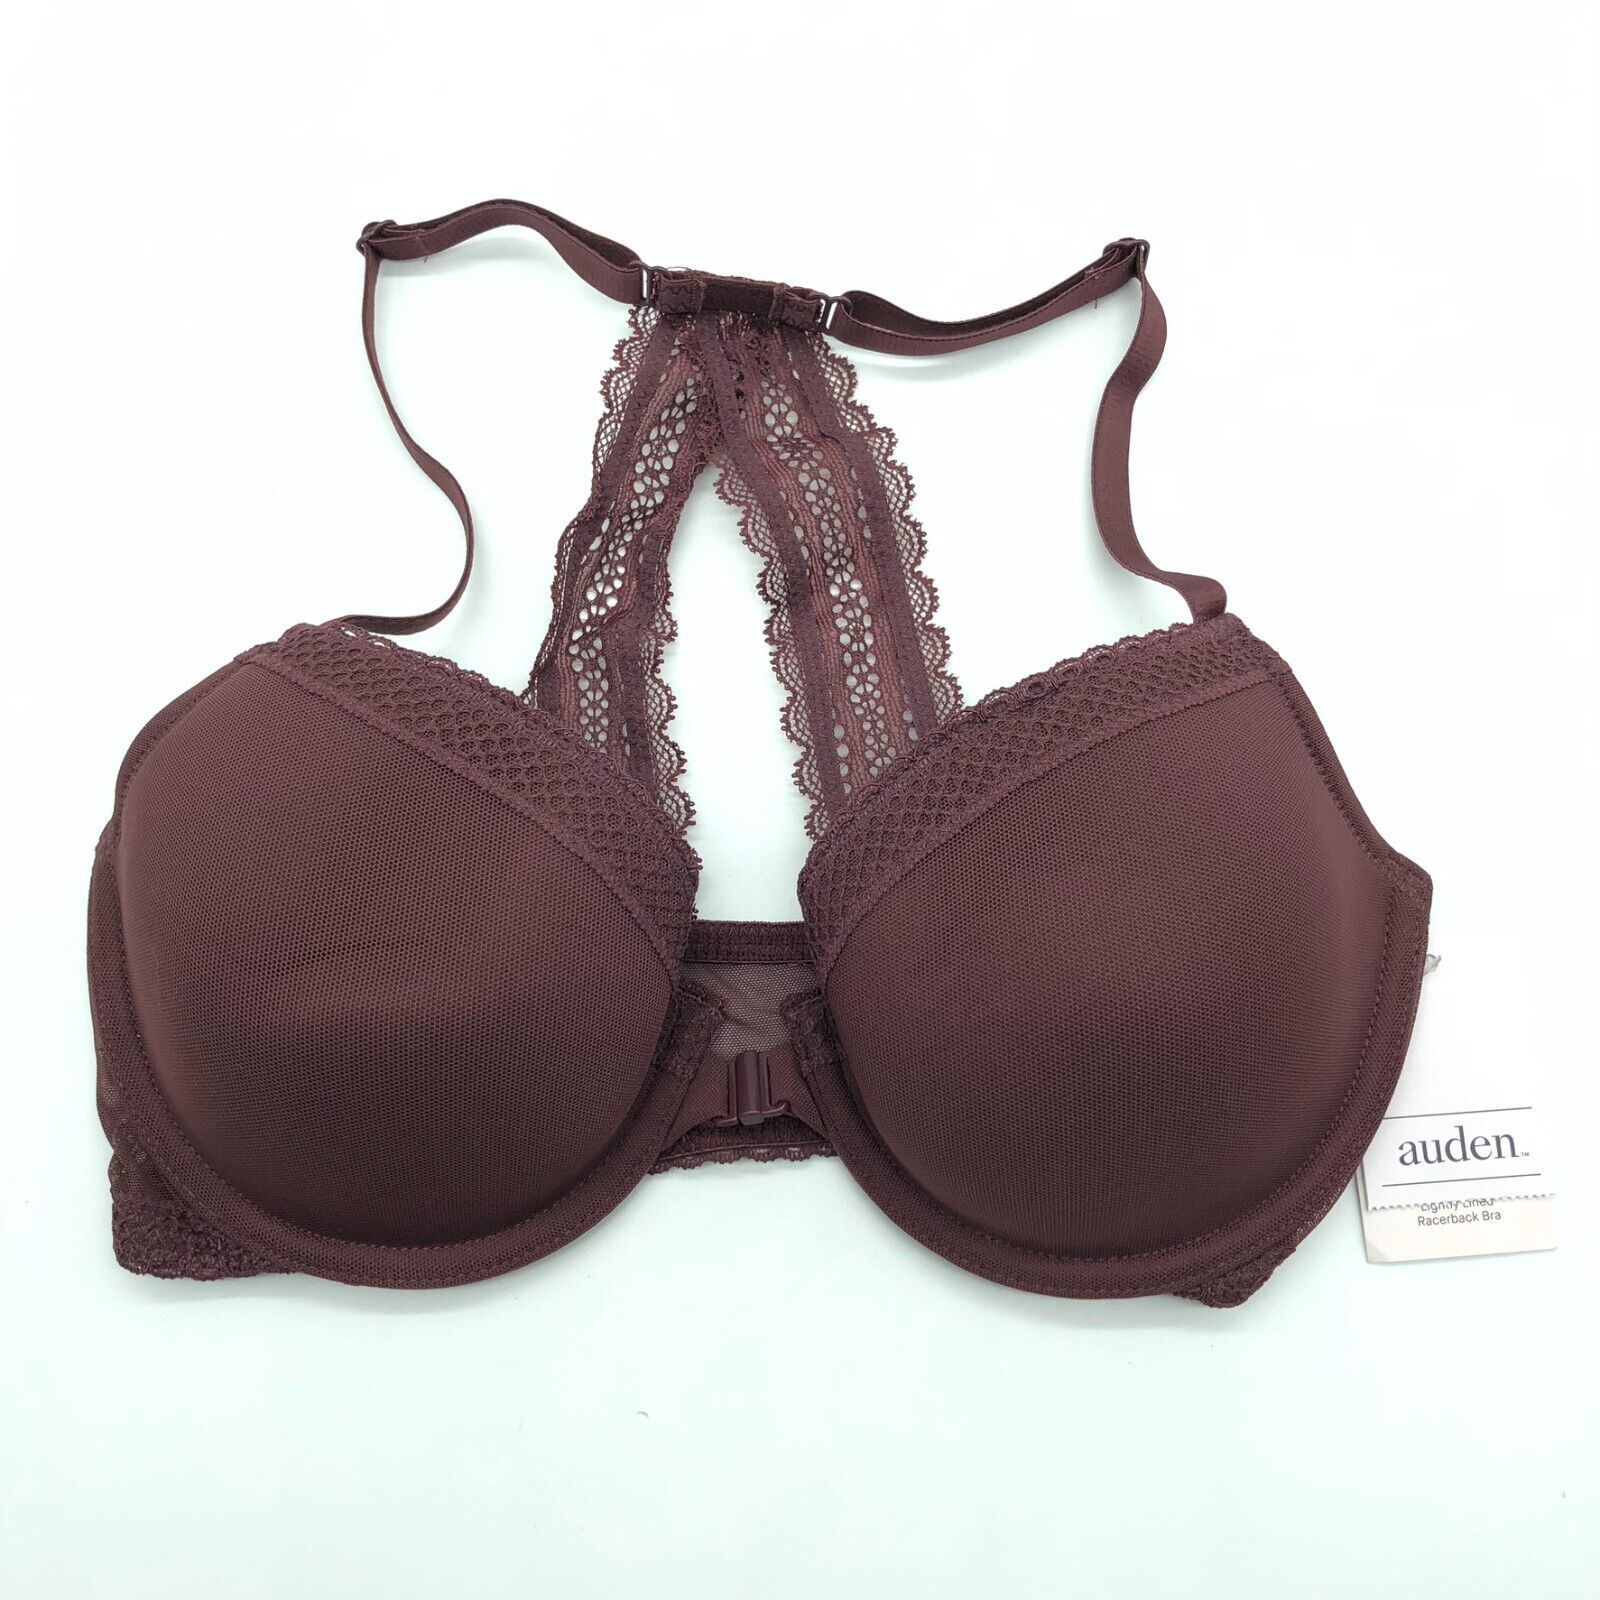 Primary image for Auden Bra The Ace Demi Front Closure Lightly Lined Racerback Burgundy 32C